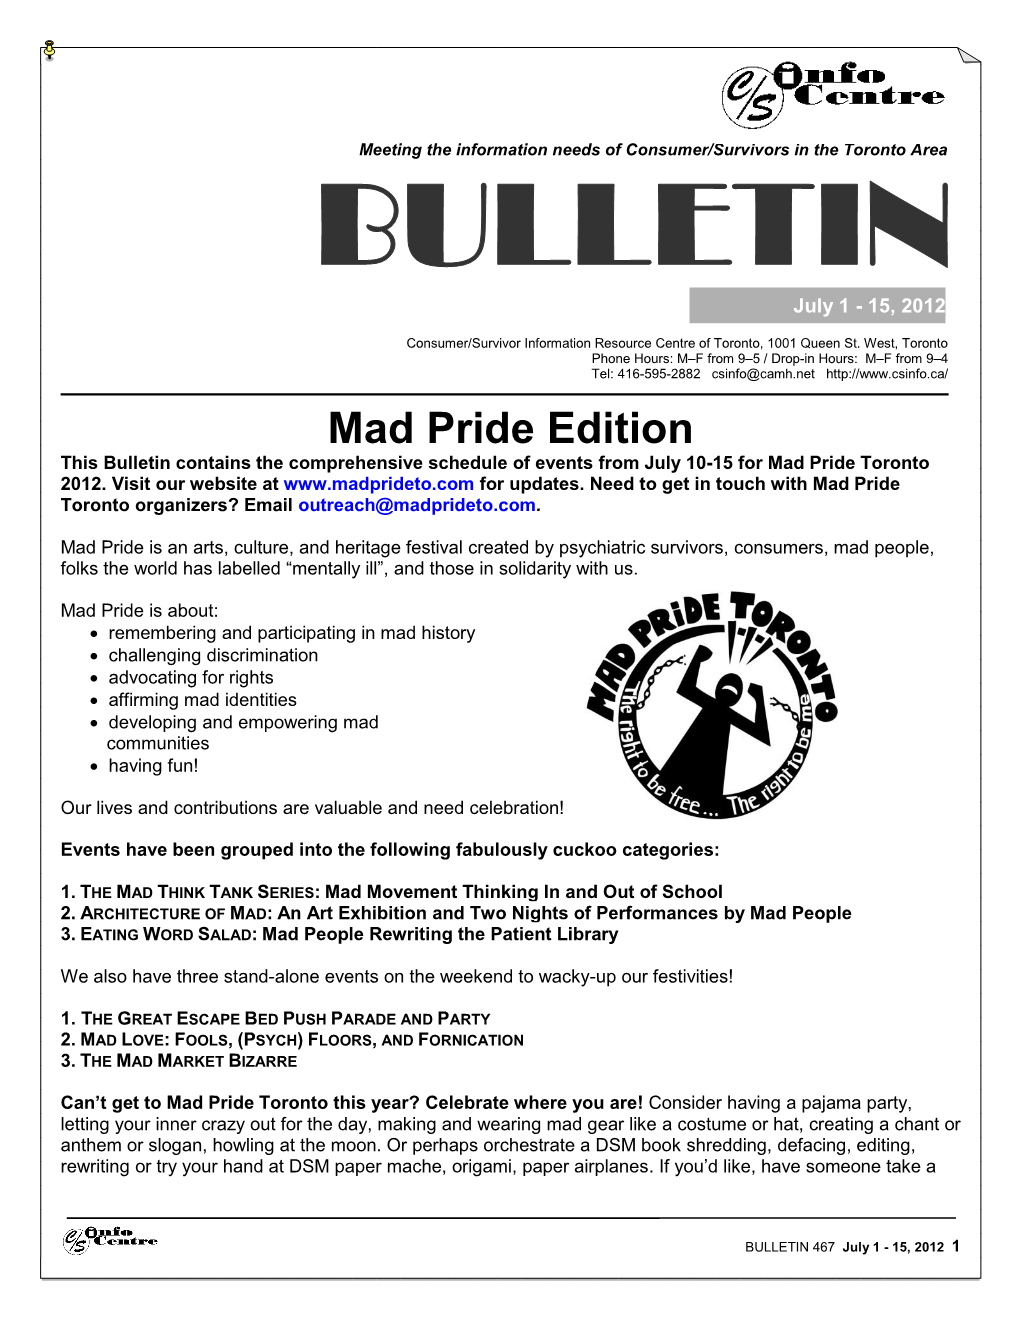 Mad Pride Edition This Bulletin Contains the Comprehensive Schedule of Events from July 10-15 for Mad Pride Toronto 2012